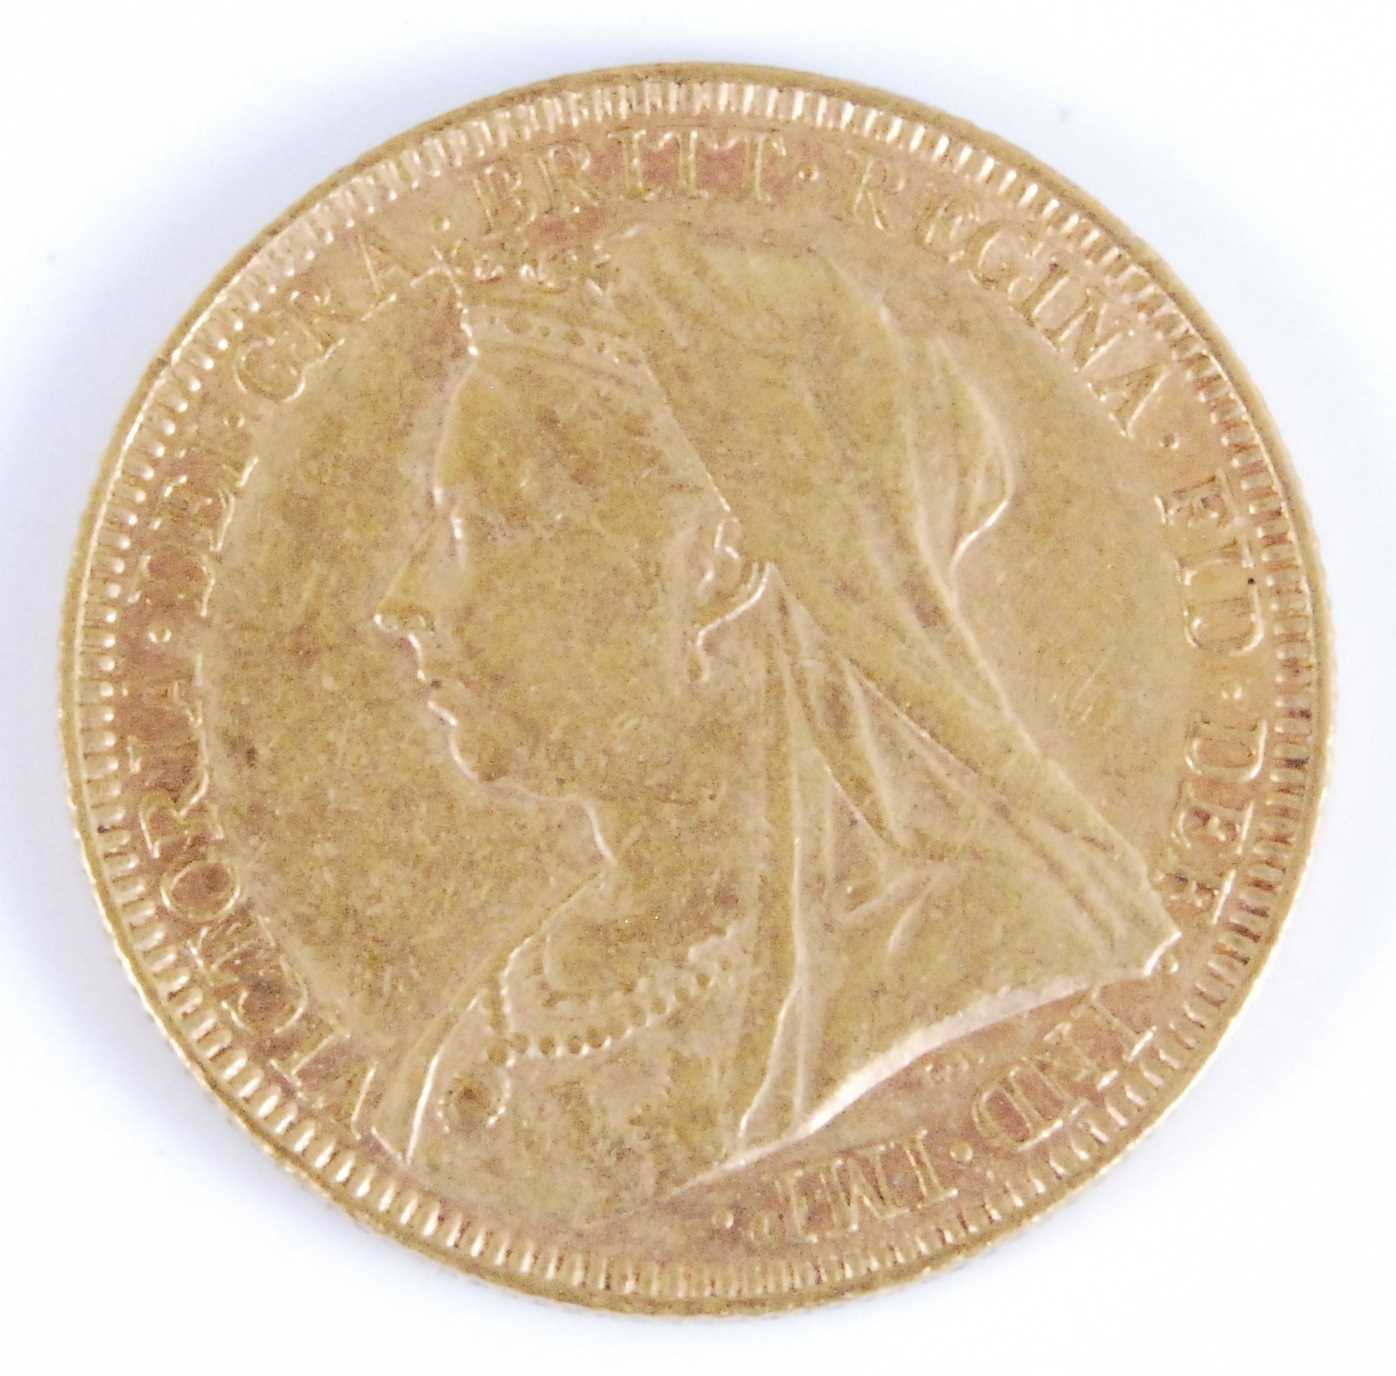 Lot 2060 - Great Britain, 1893 gold full sovereign